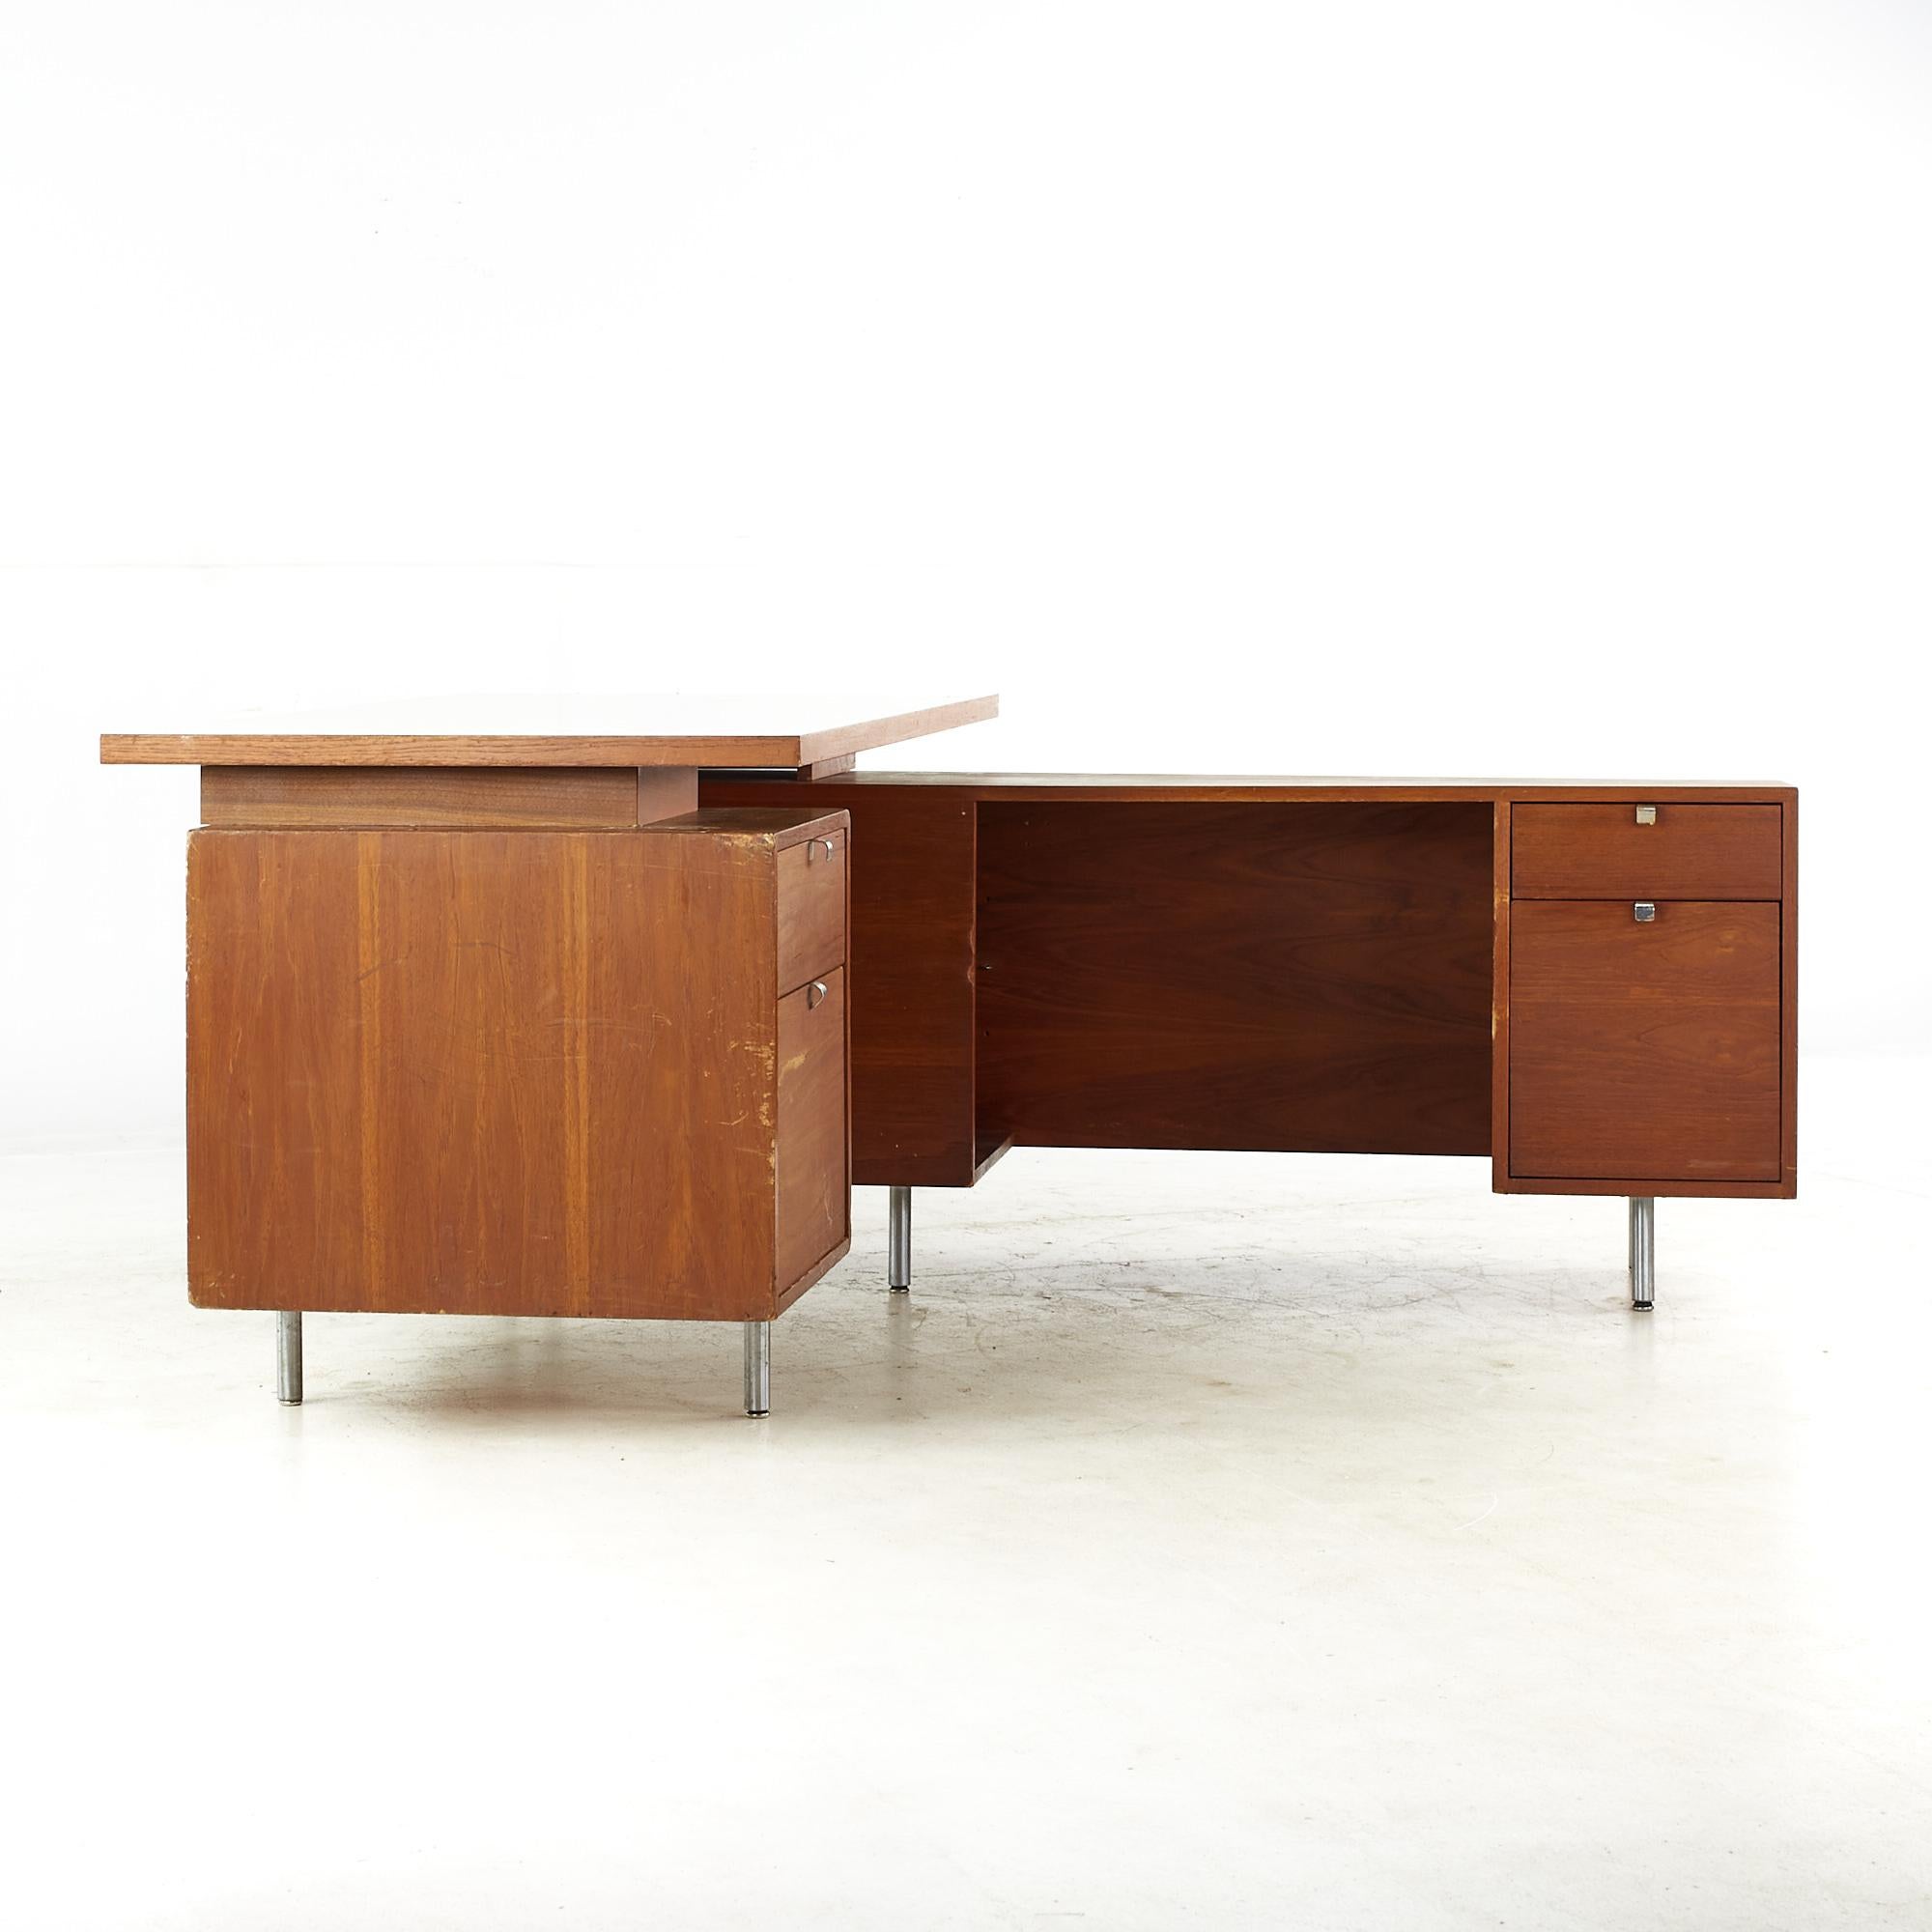 George Nelson for Herman Miller Mid Century Walnut Corner Executive Desk

This desk measures: 60 wide x 30 deep x 29.75 high, with a chair clearance of 25 inches
The return measures: 60 wide x 41.5 deep x 25.75 inches high

All pieces of furniture